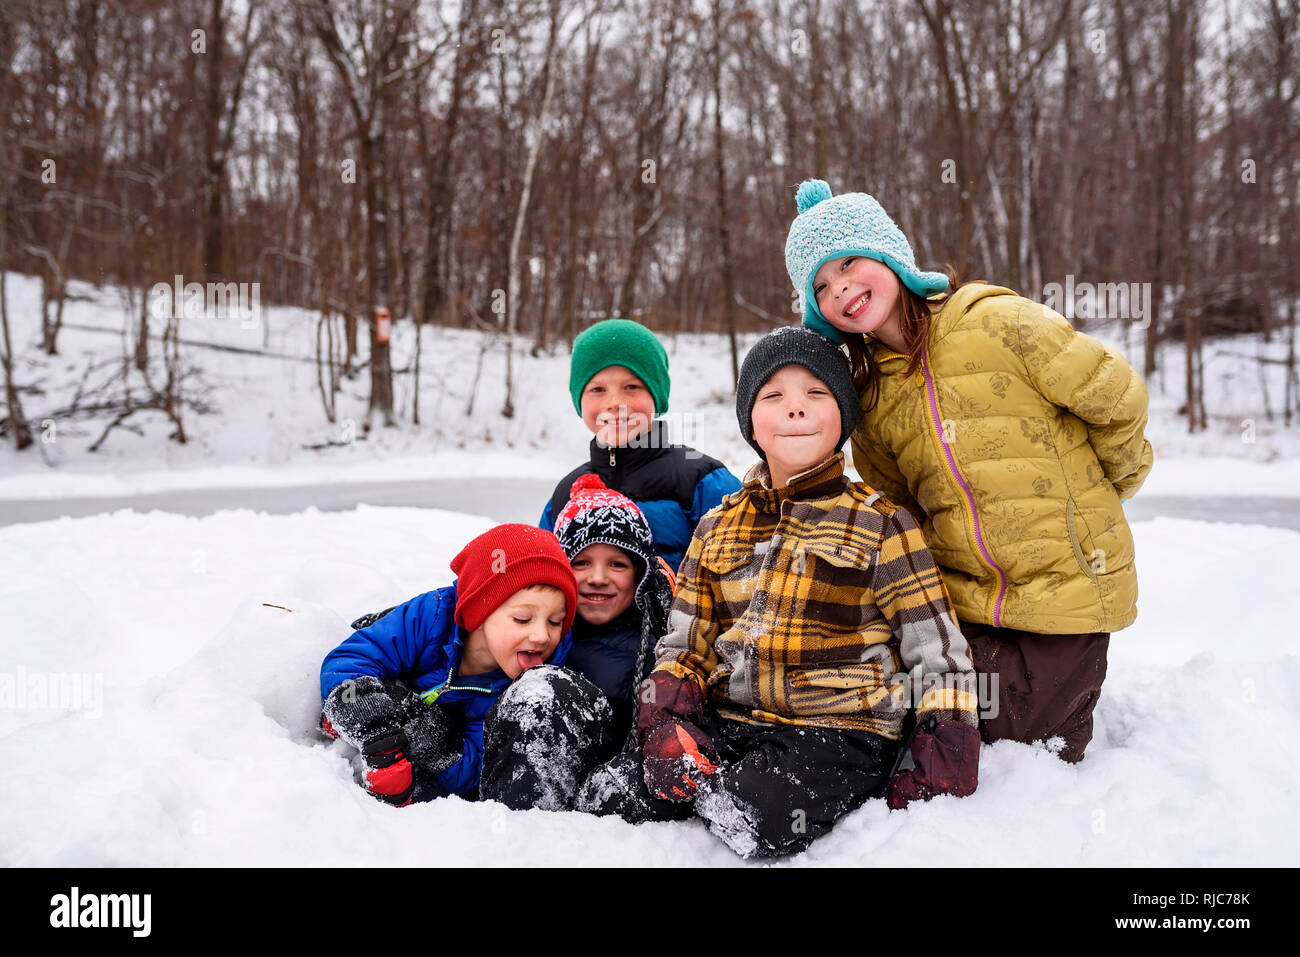 Five children sitting in the snow, Wisconsin, United States Stock Photo